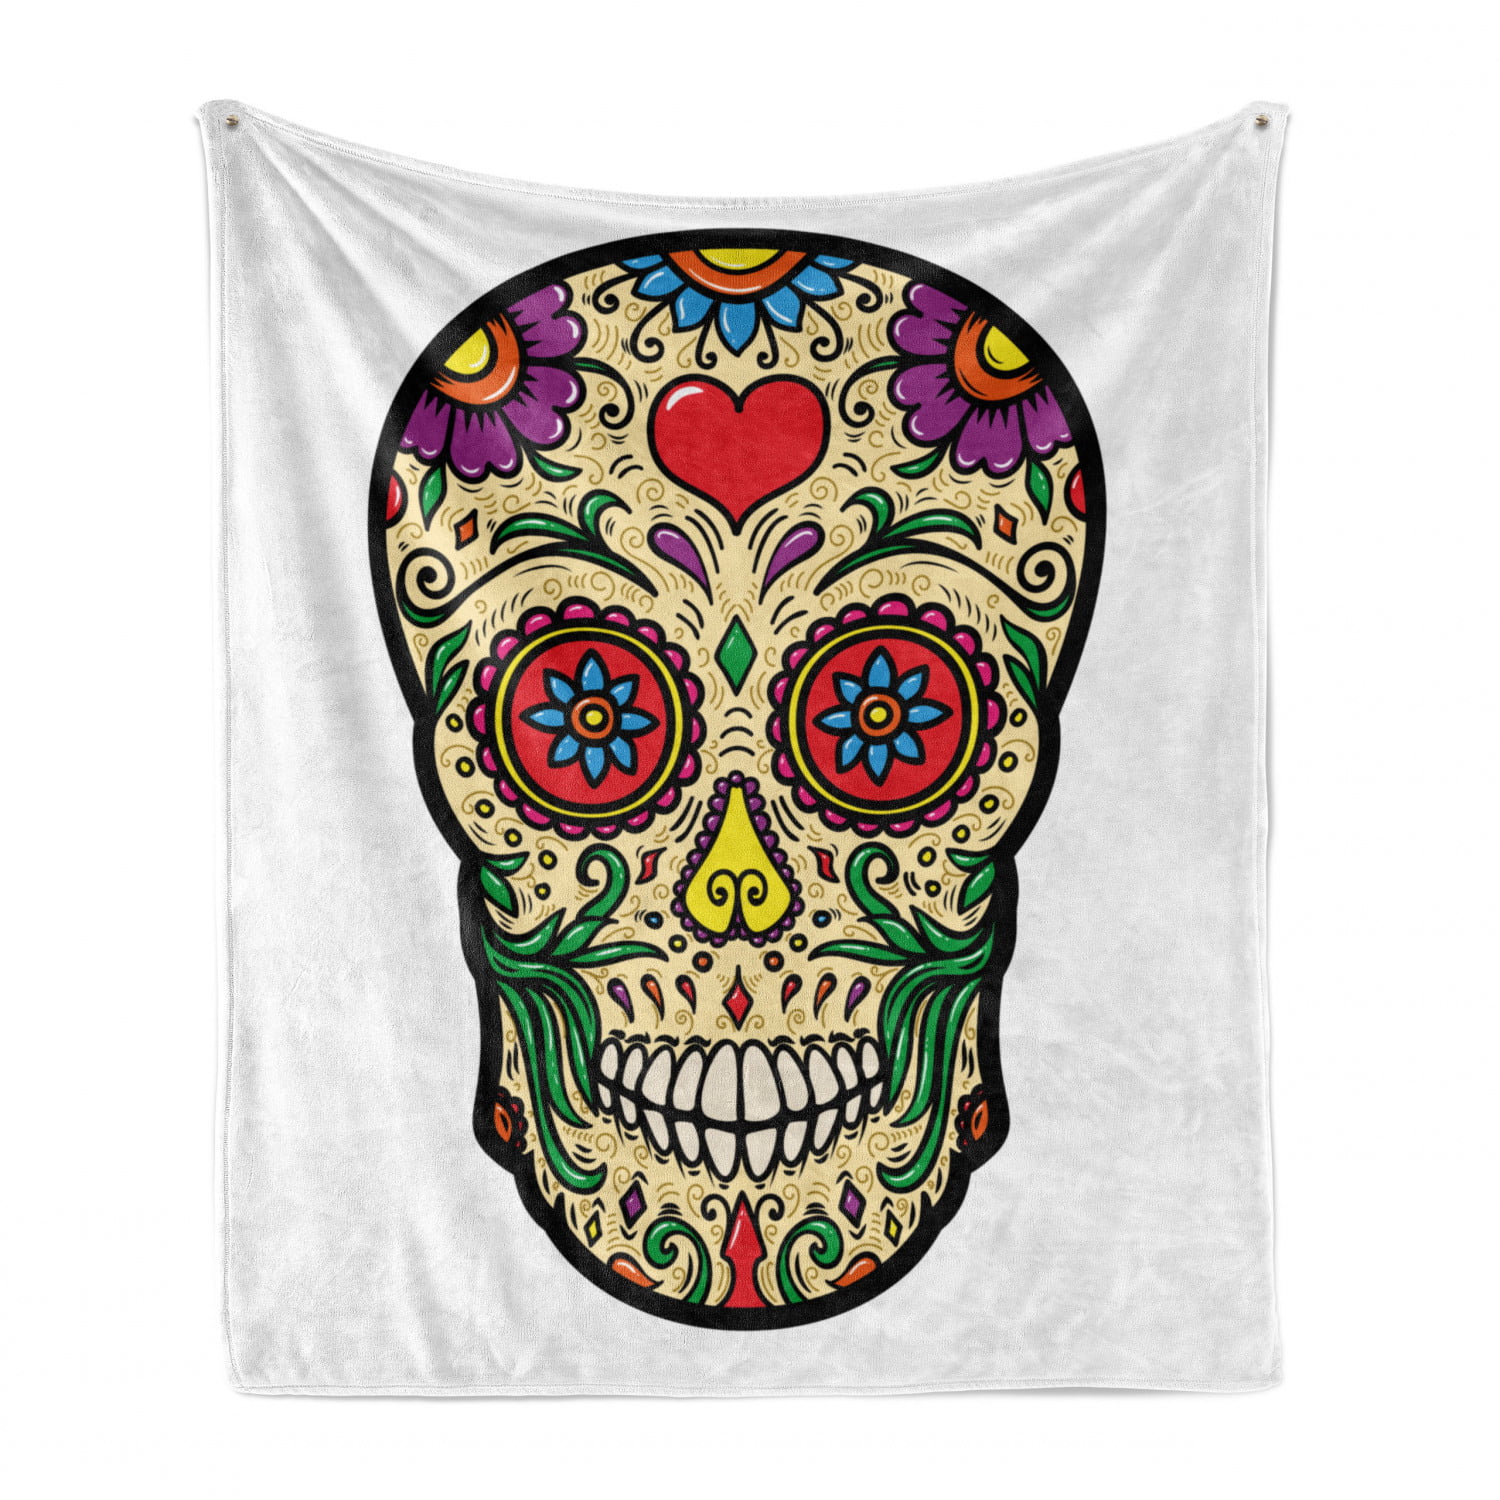 Day of The Dead Themed Half Face and Roses 60 x 80 Petrol Blue Dark Teal Lunarable Sugar Skull Soft Flannel Fleece Throw Blanket Cozy Plush for Indoor and Outdoor Use 